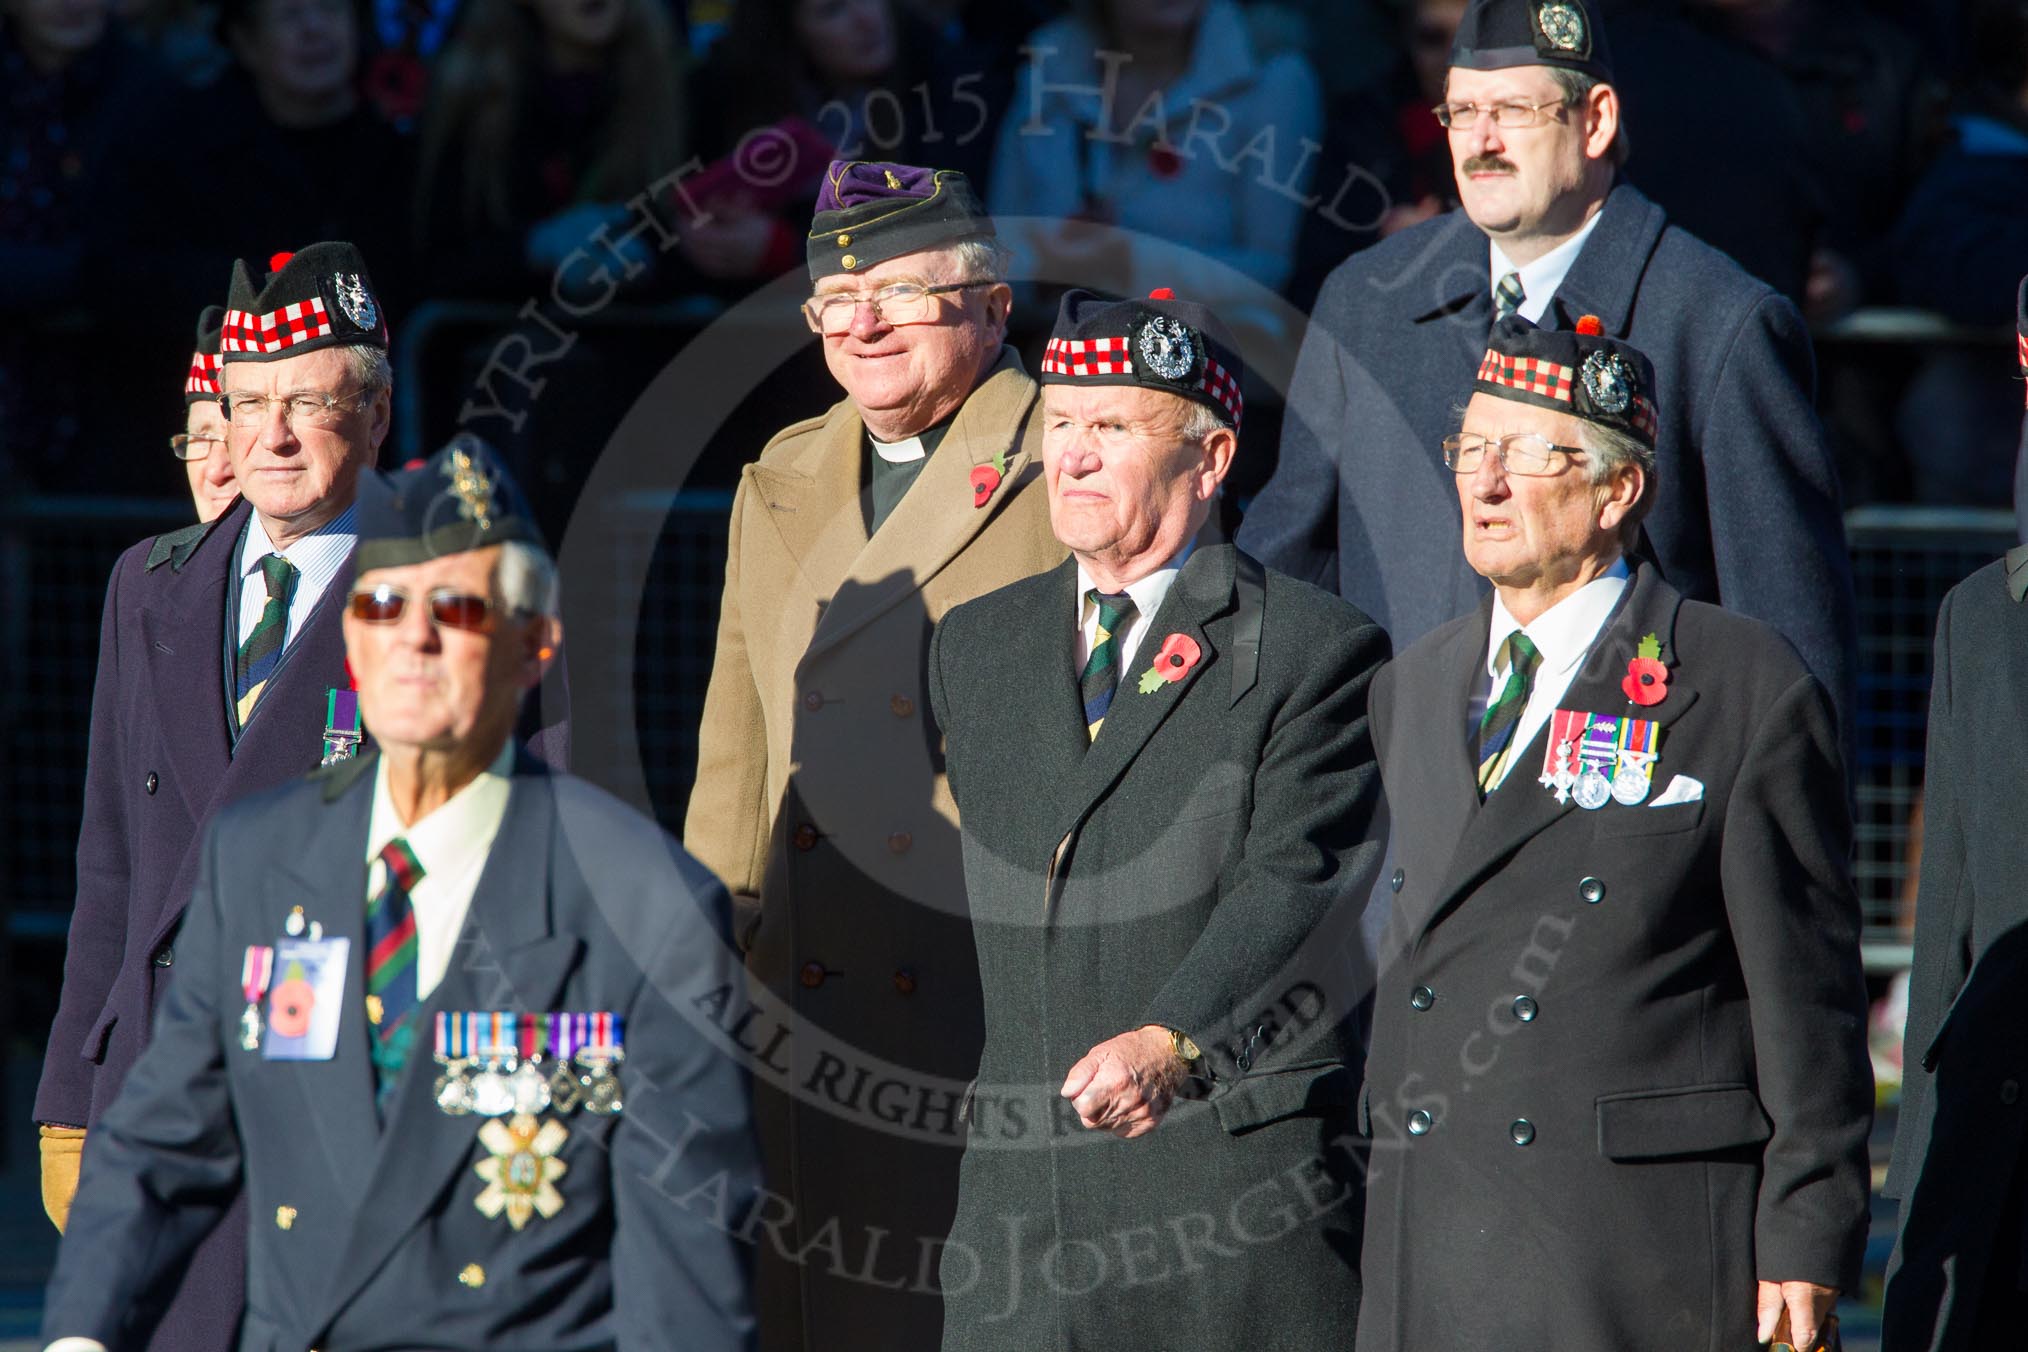 Remembrance Sunday Cenotaph March Past 2013: A22 - Gordon Highlanders Association..
Press stand opposite the Foreign Office building, Whitehall, London SW1,
London,
Greater London,
United Kingdom,
on 10 November 2013 at 11:57, image #1209